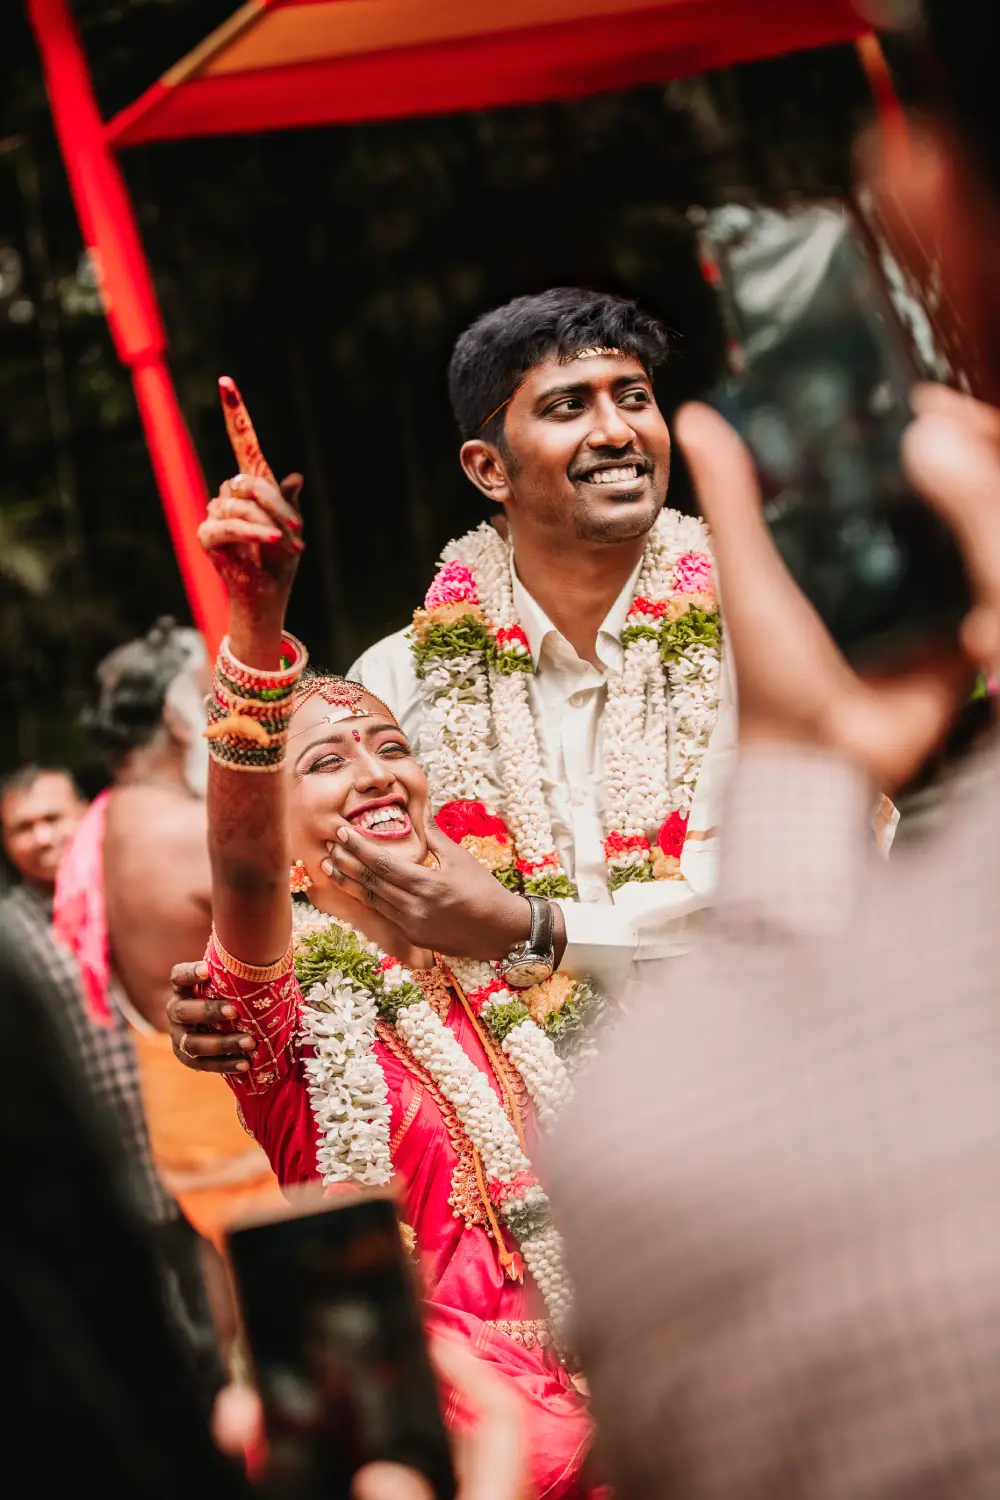 Future Frames Photography - Photographer - Jubilee Hills - Weddingwire.in